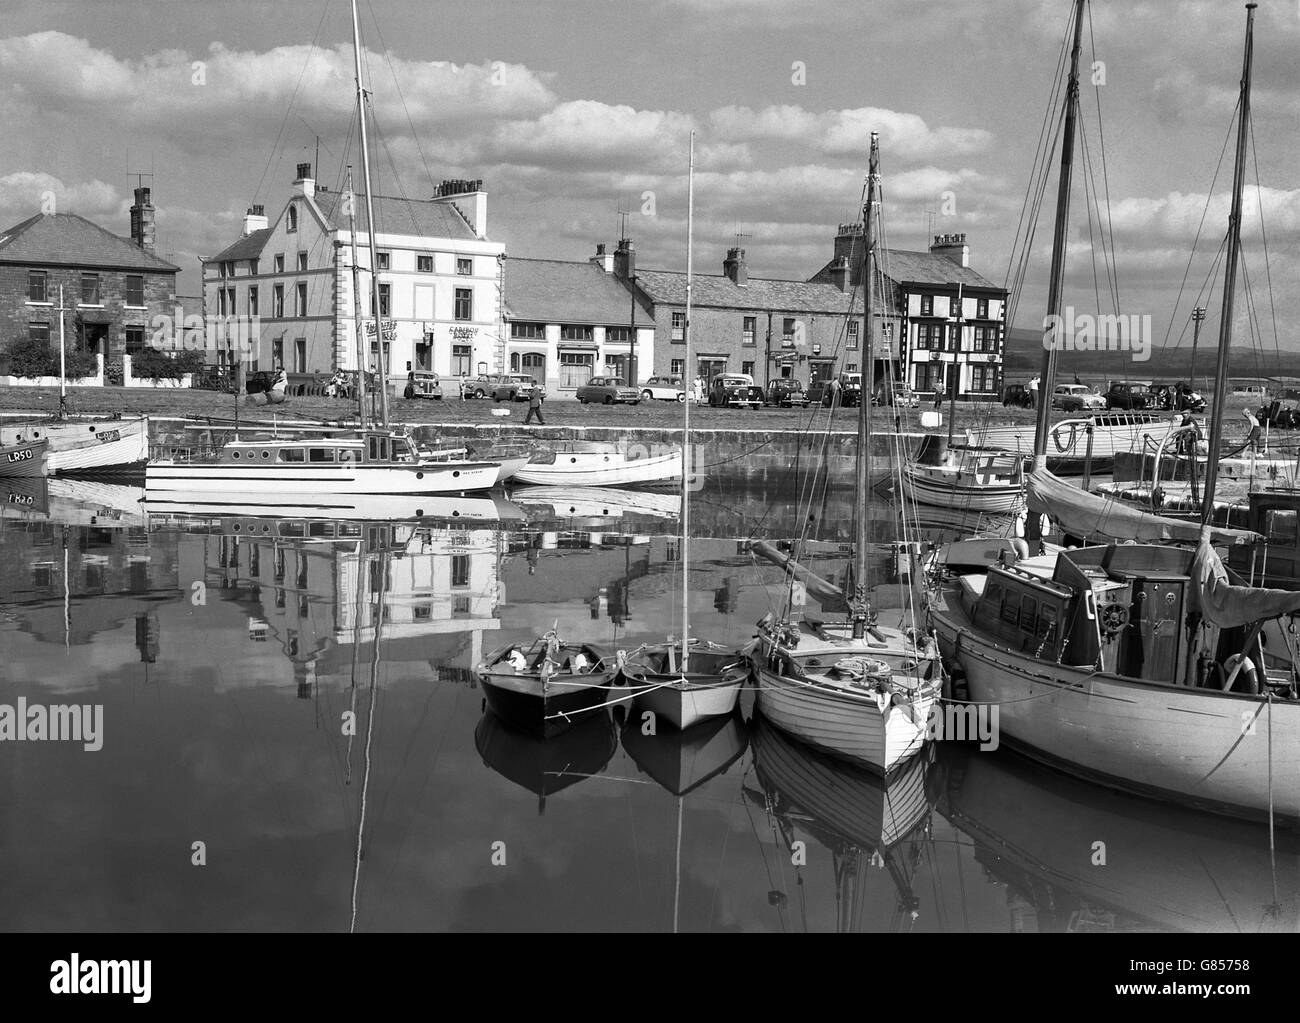 Glasson Dock, an old port on the Lancashire coast. On the quay is the Caribou Inn. Stock Photo